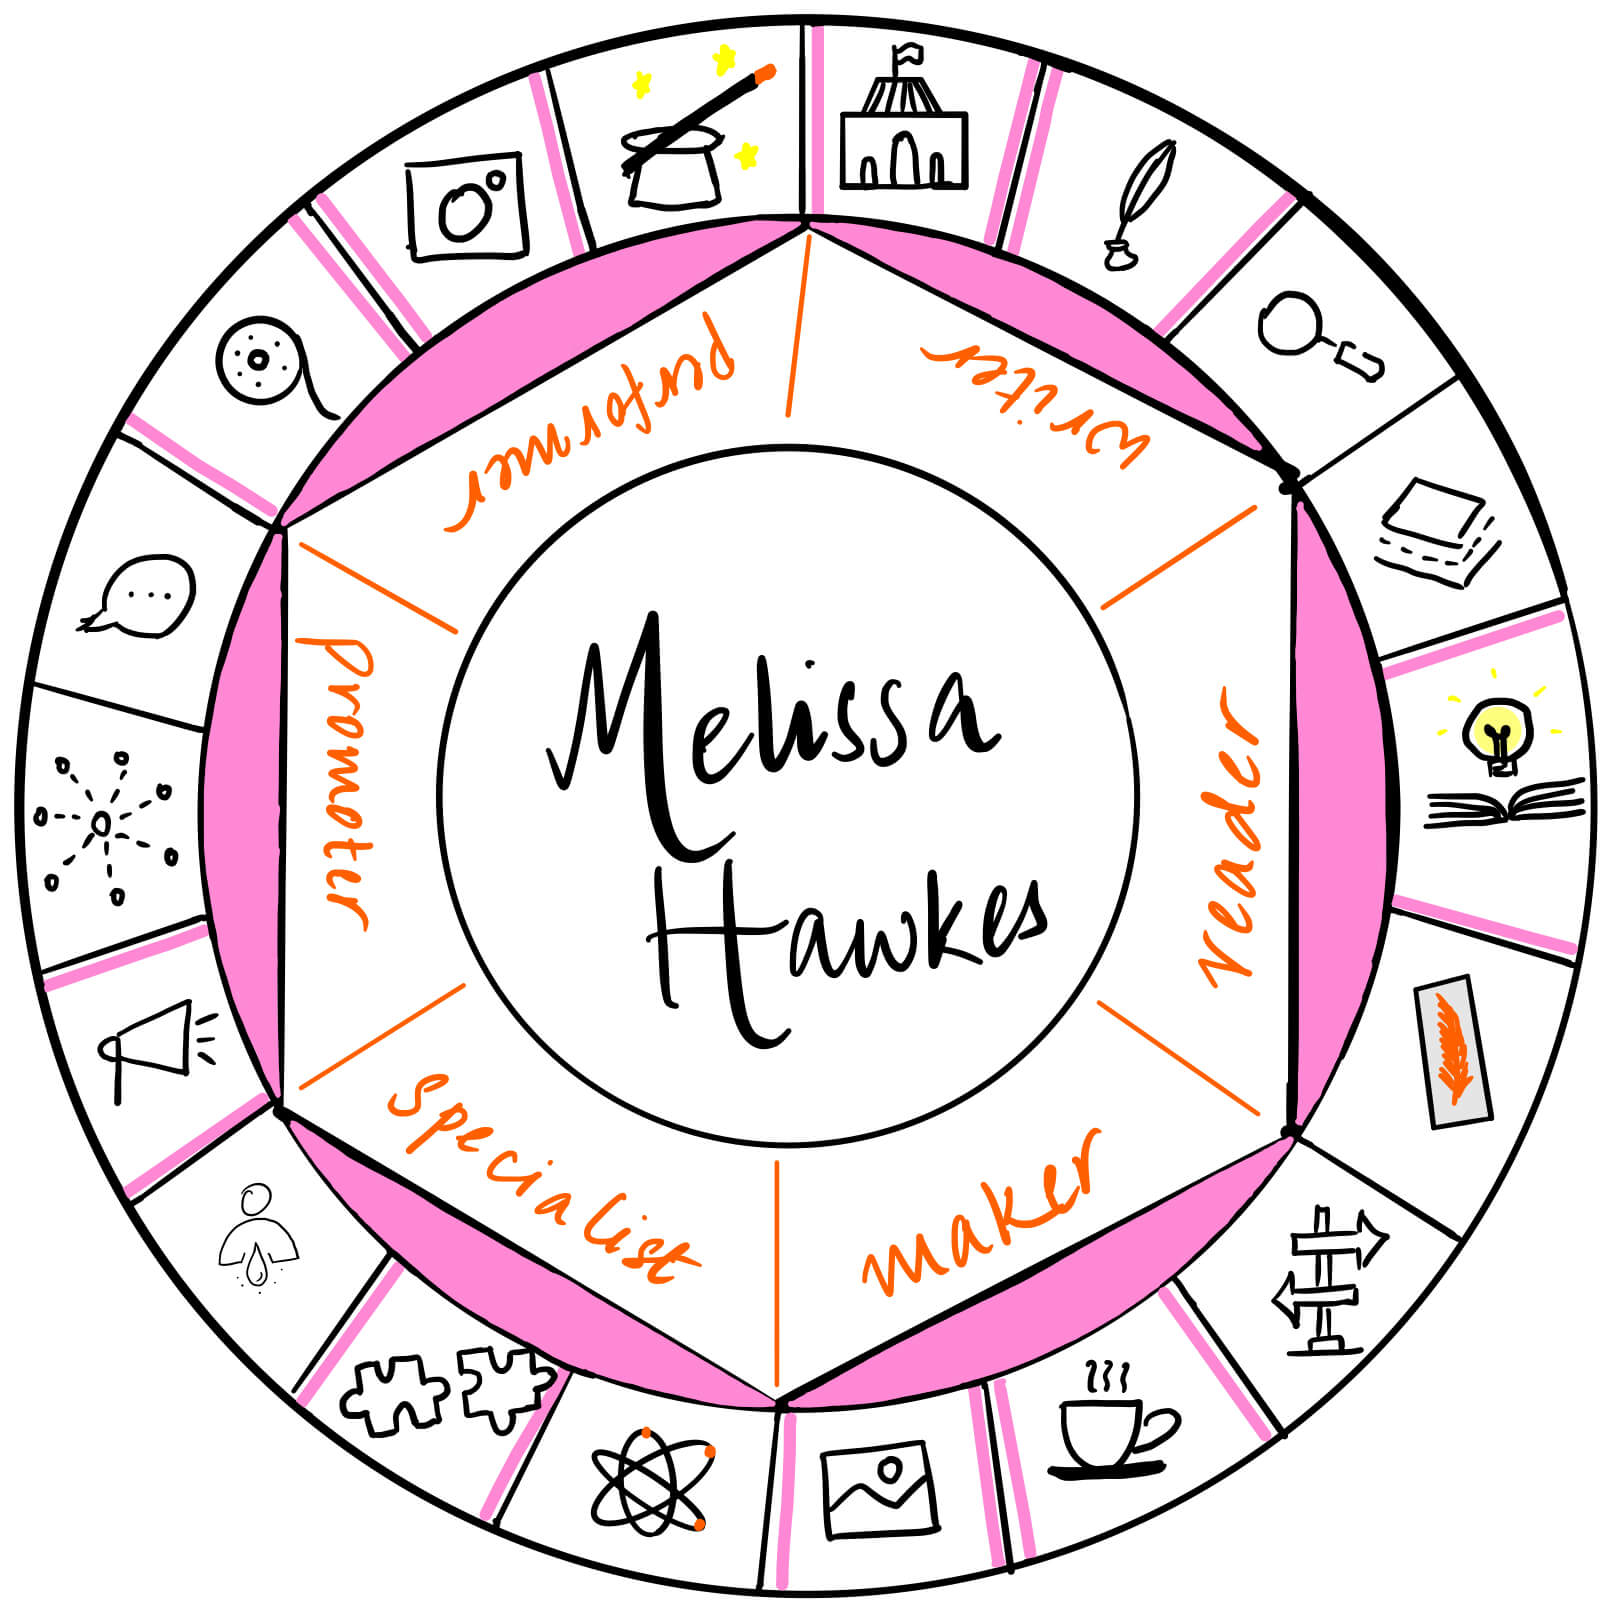 Melissa Hawkes is a writer, performer, promoter, maker, reader and specialist. It's a pleasure to have her over on The Creator's Roulette for a guest post to share tips about marketing for authors.